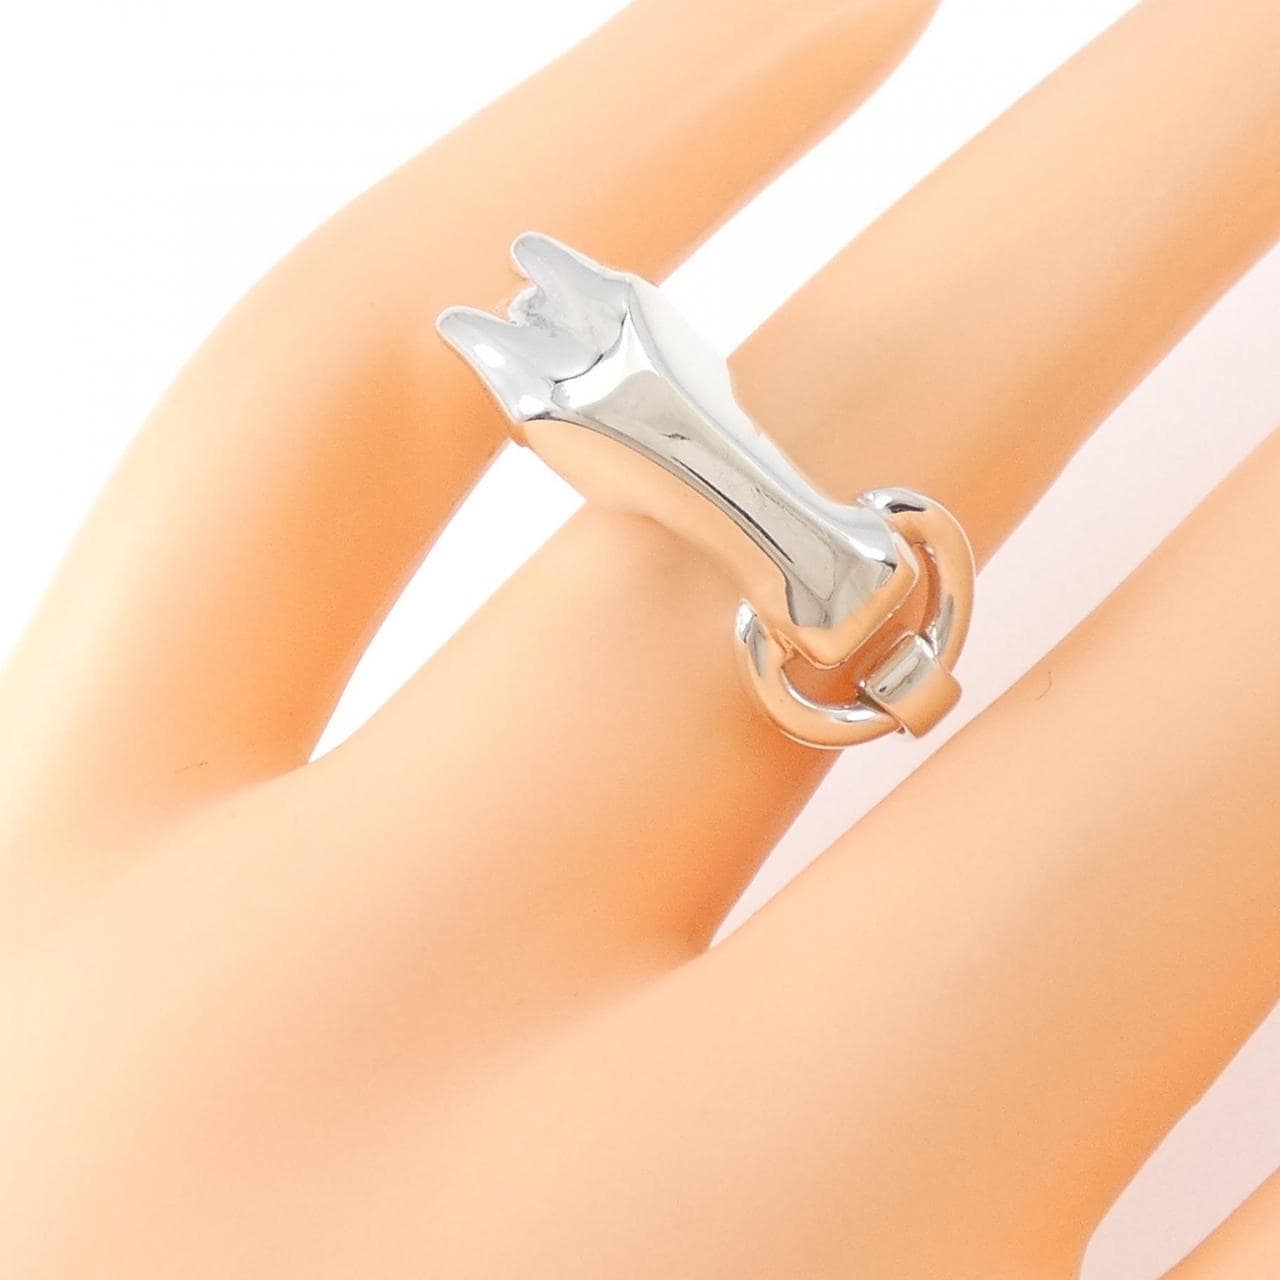 HERMES gallop ring